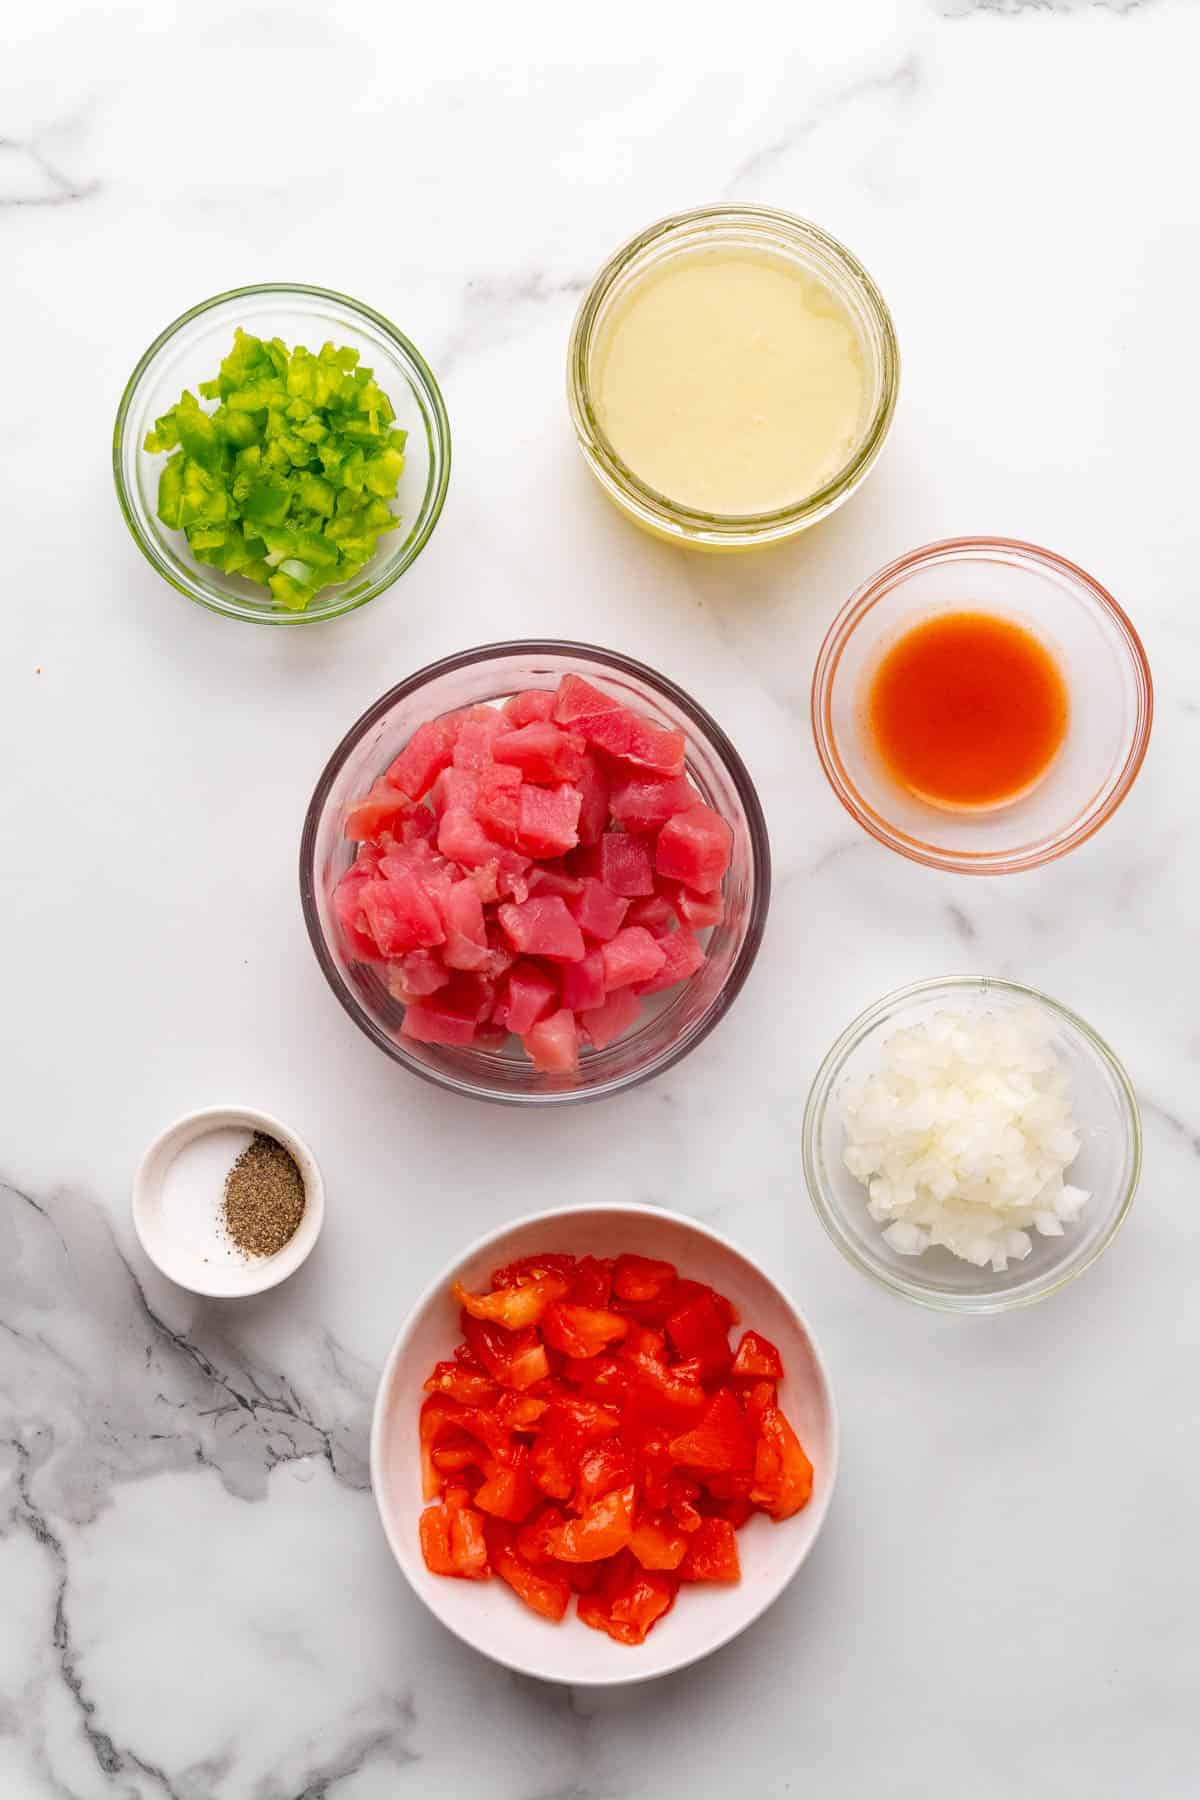 Ingredients for recipe separated into individual ramekins and bowls, as seen from above on a white background